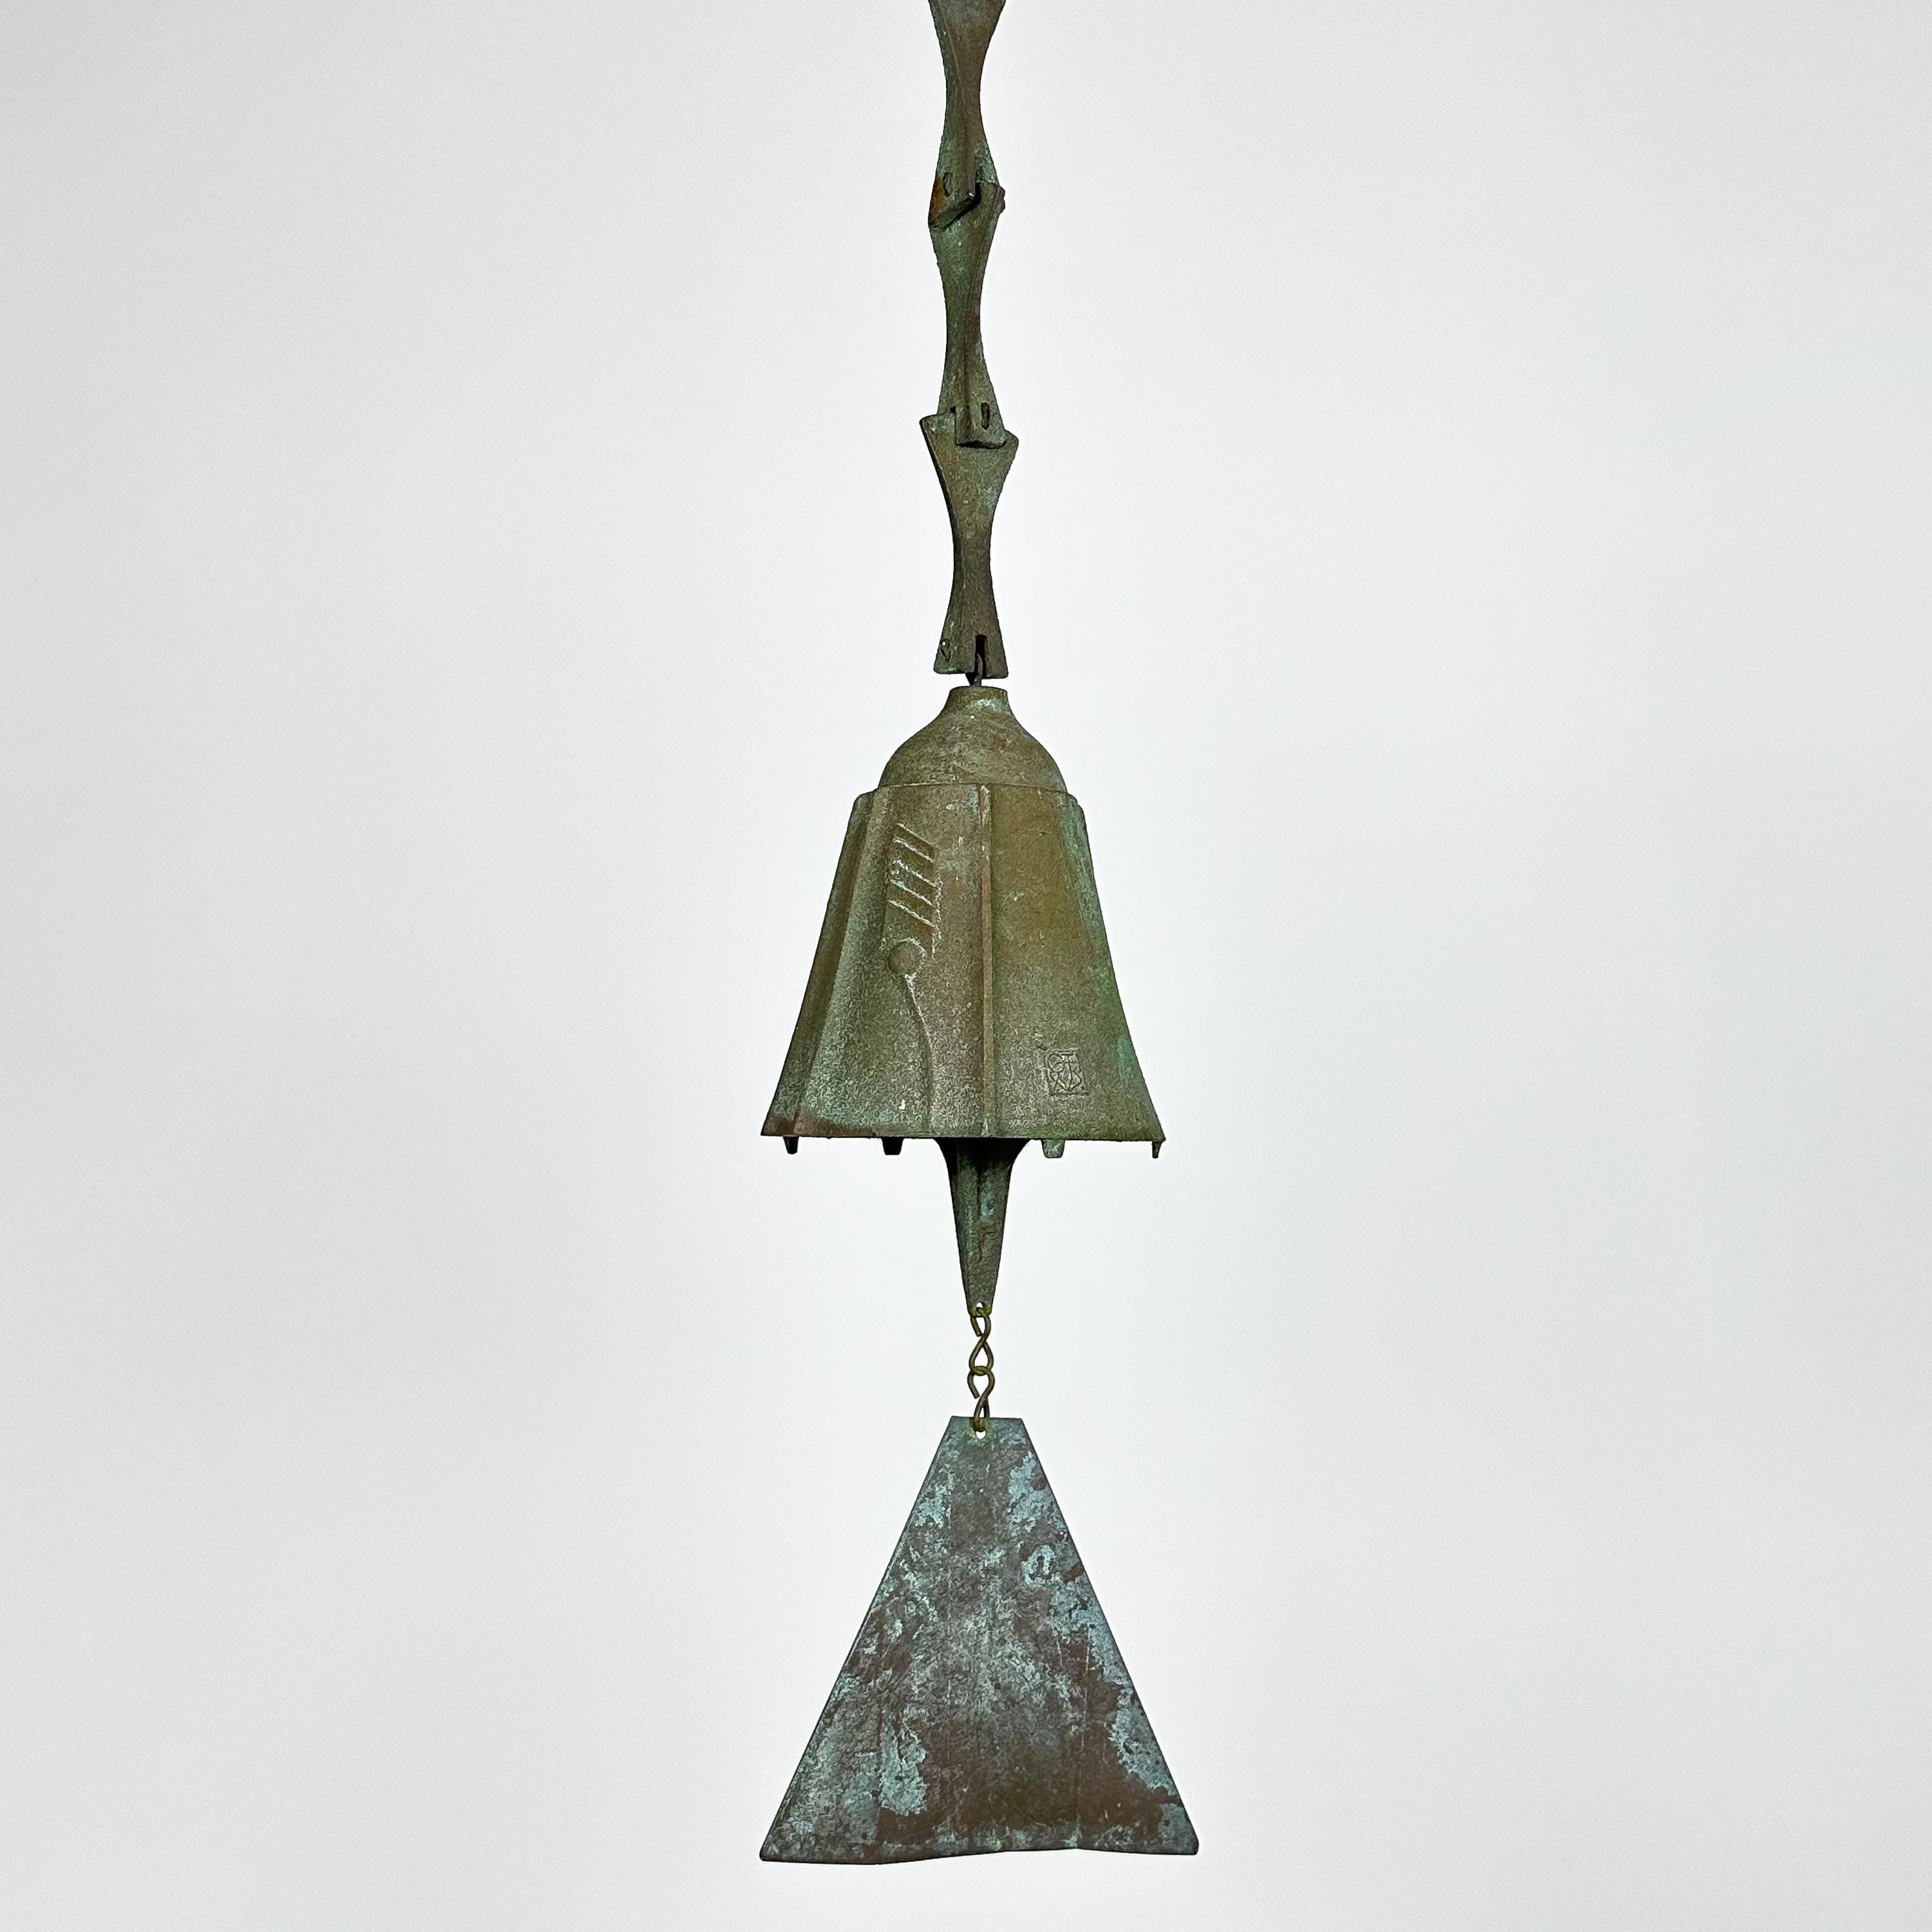 Mid-Century Modern Mid-Century Bronze Bell / Wind Chime by Paolo Soleri for Arcosanti